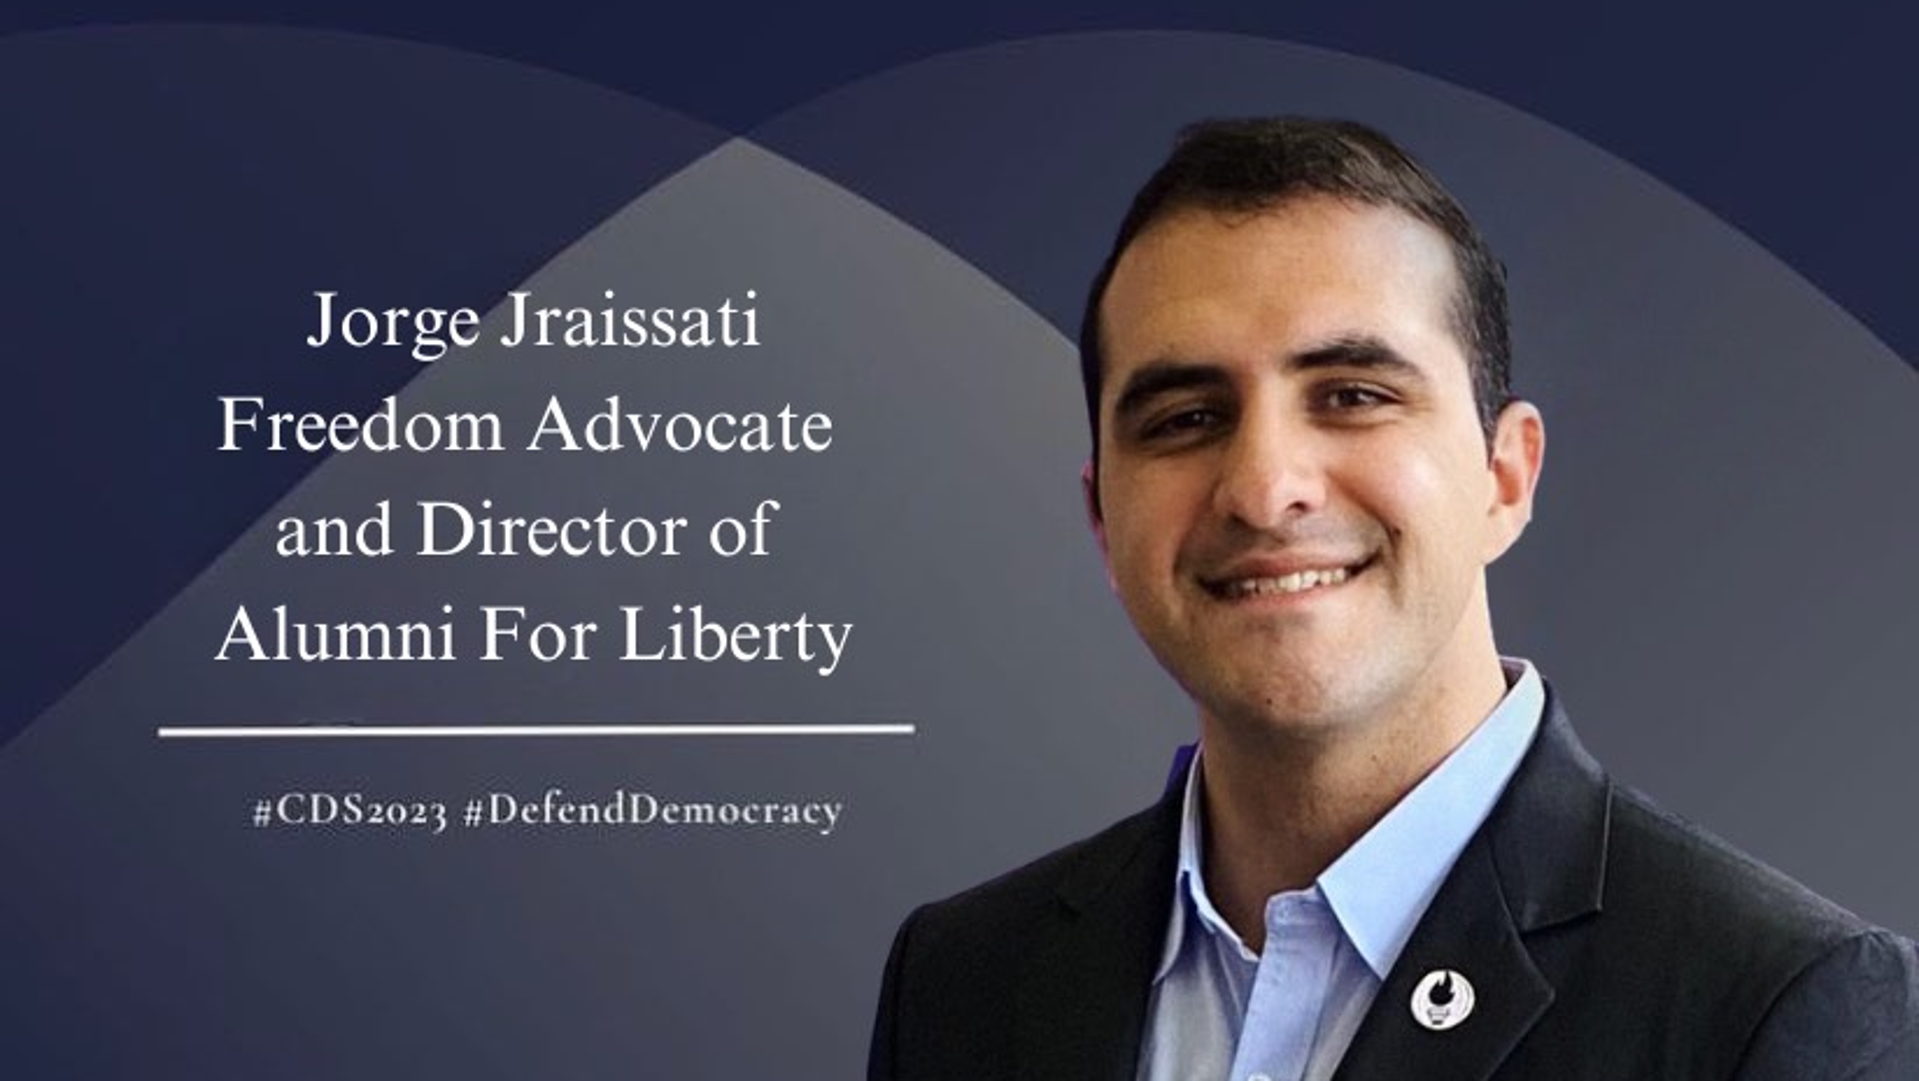 Jorge Jraissati, Director of Alumni For Liberty, has been invited to participate as a speaker at the esteemed Copenhagen Democracy Summit 2023